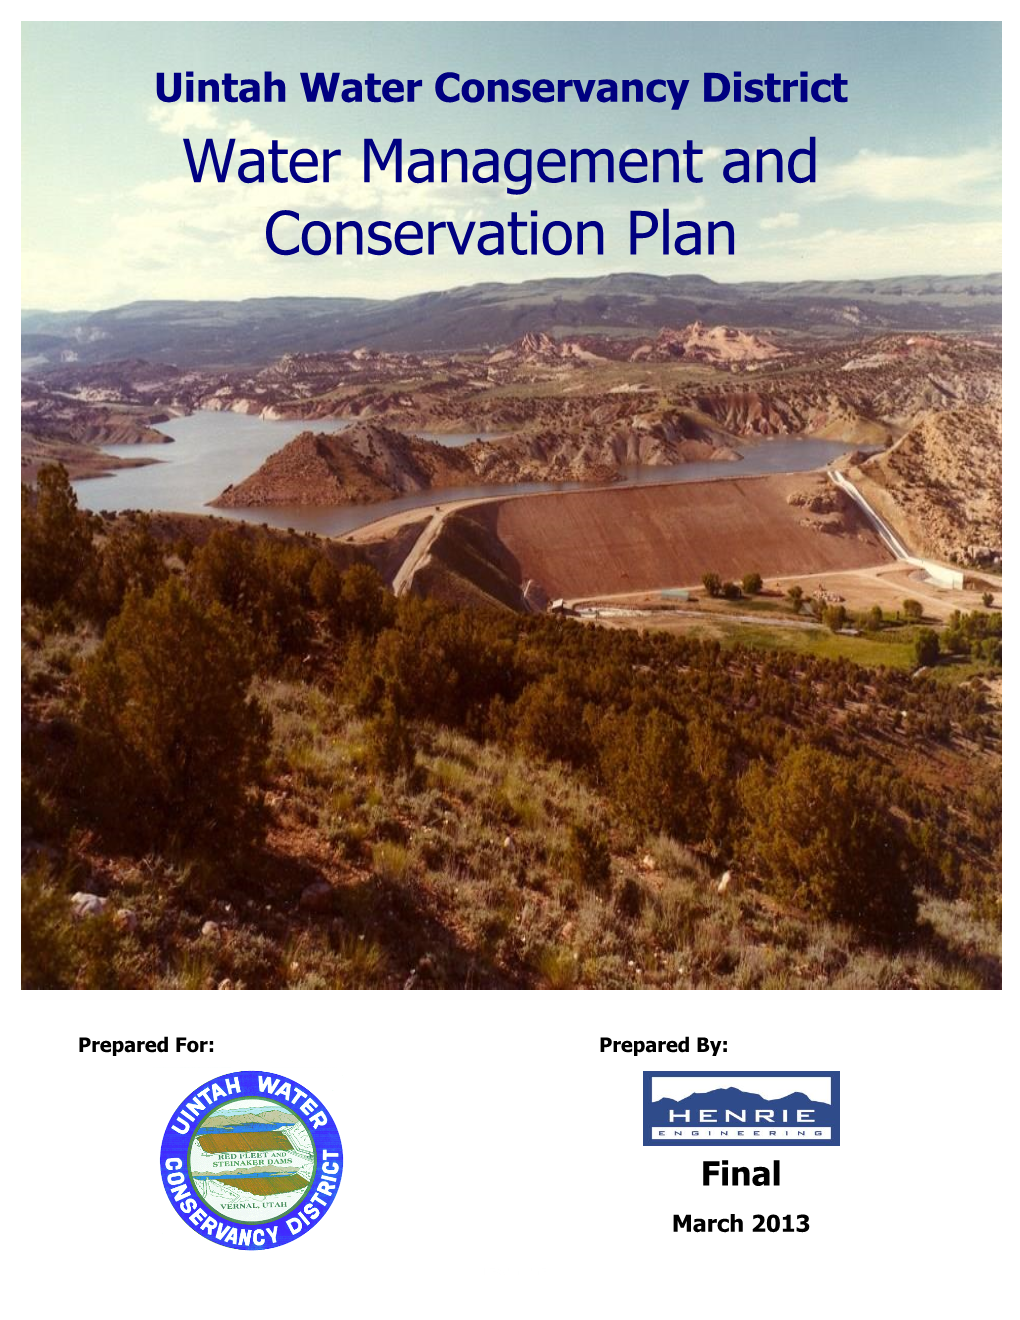 Water Management and Conservation Plan